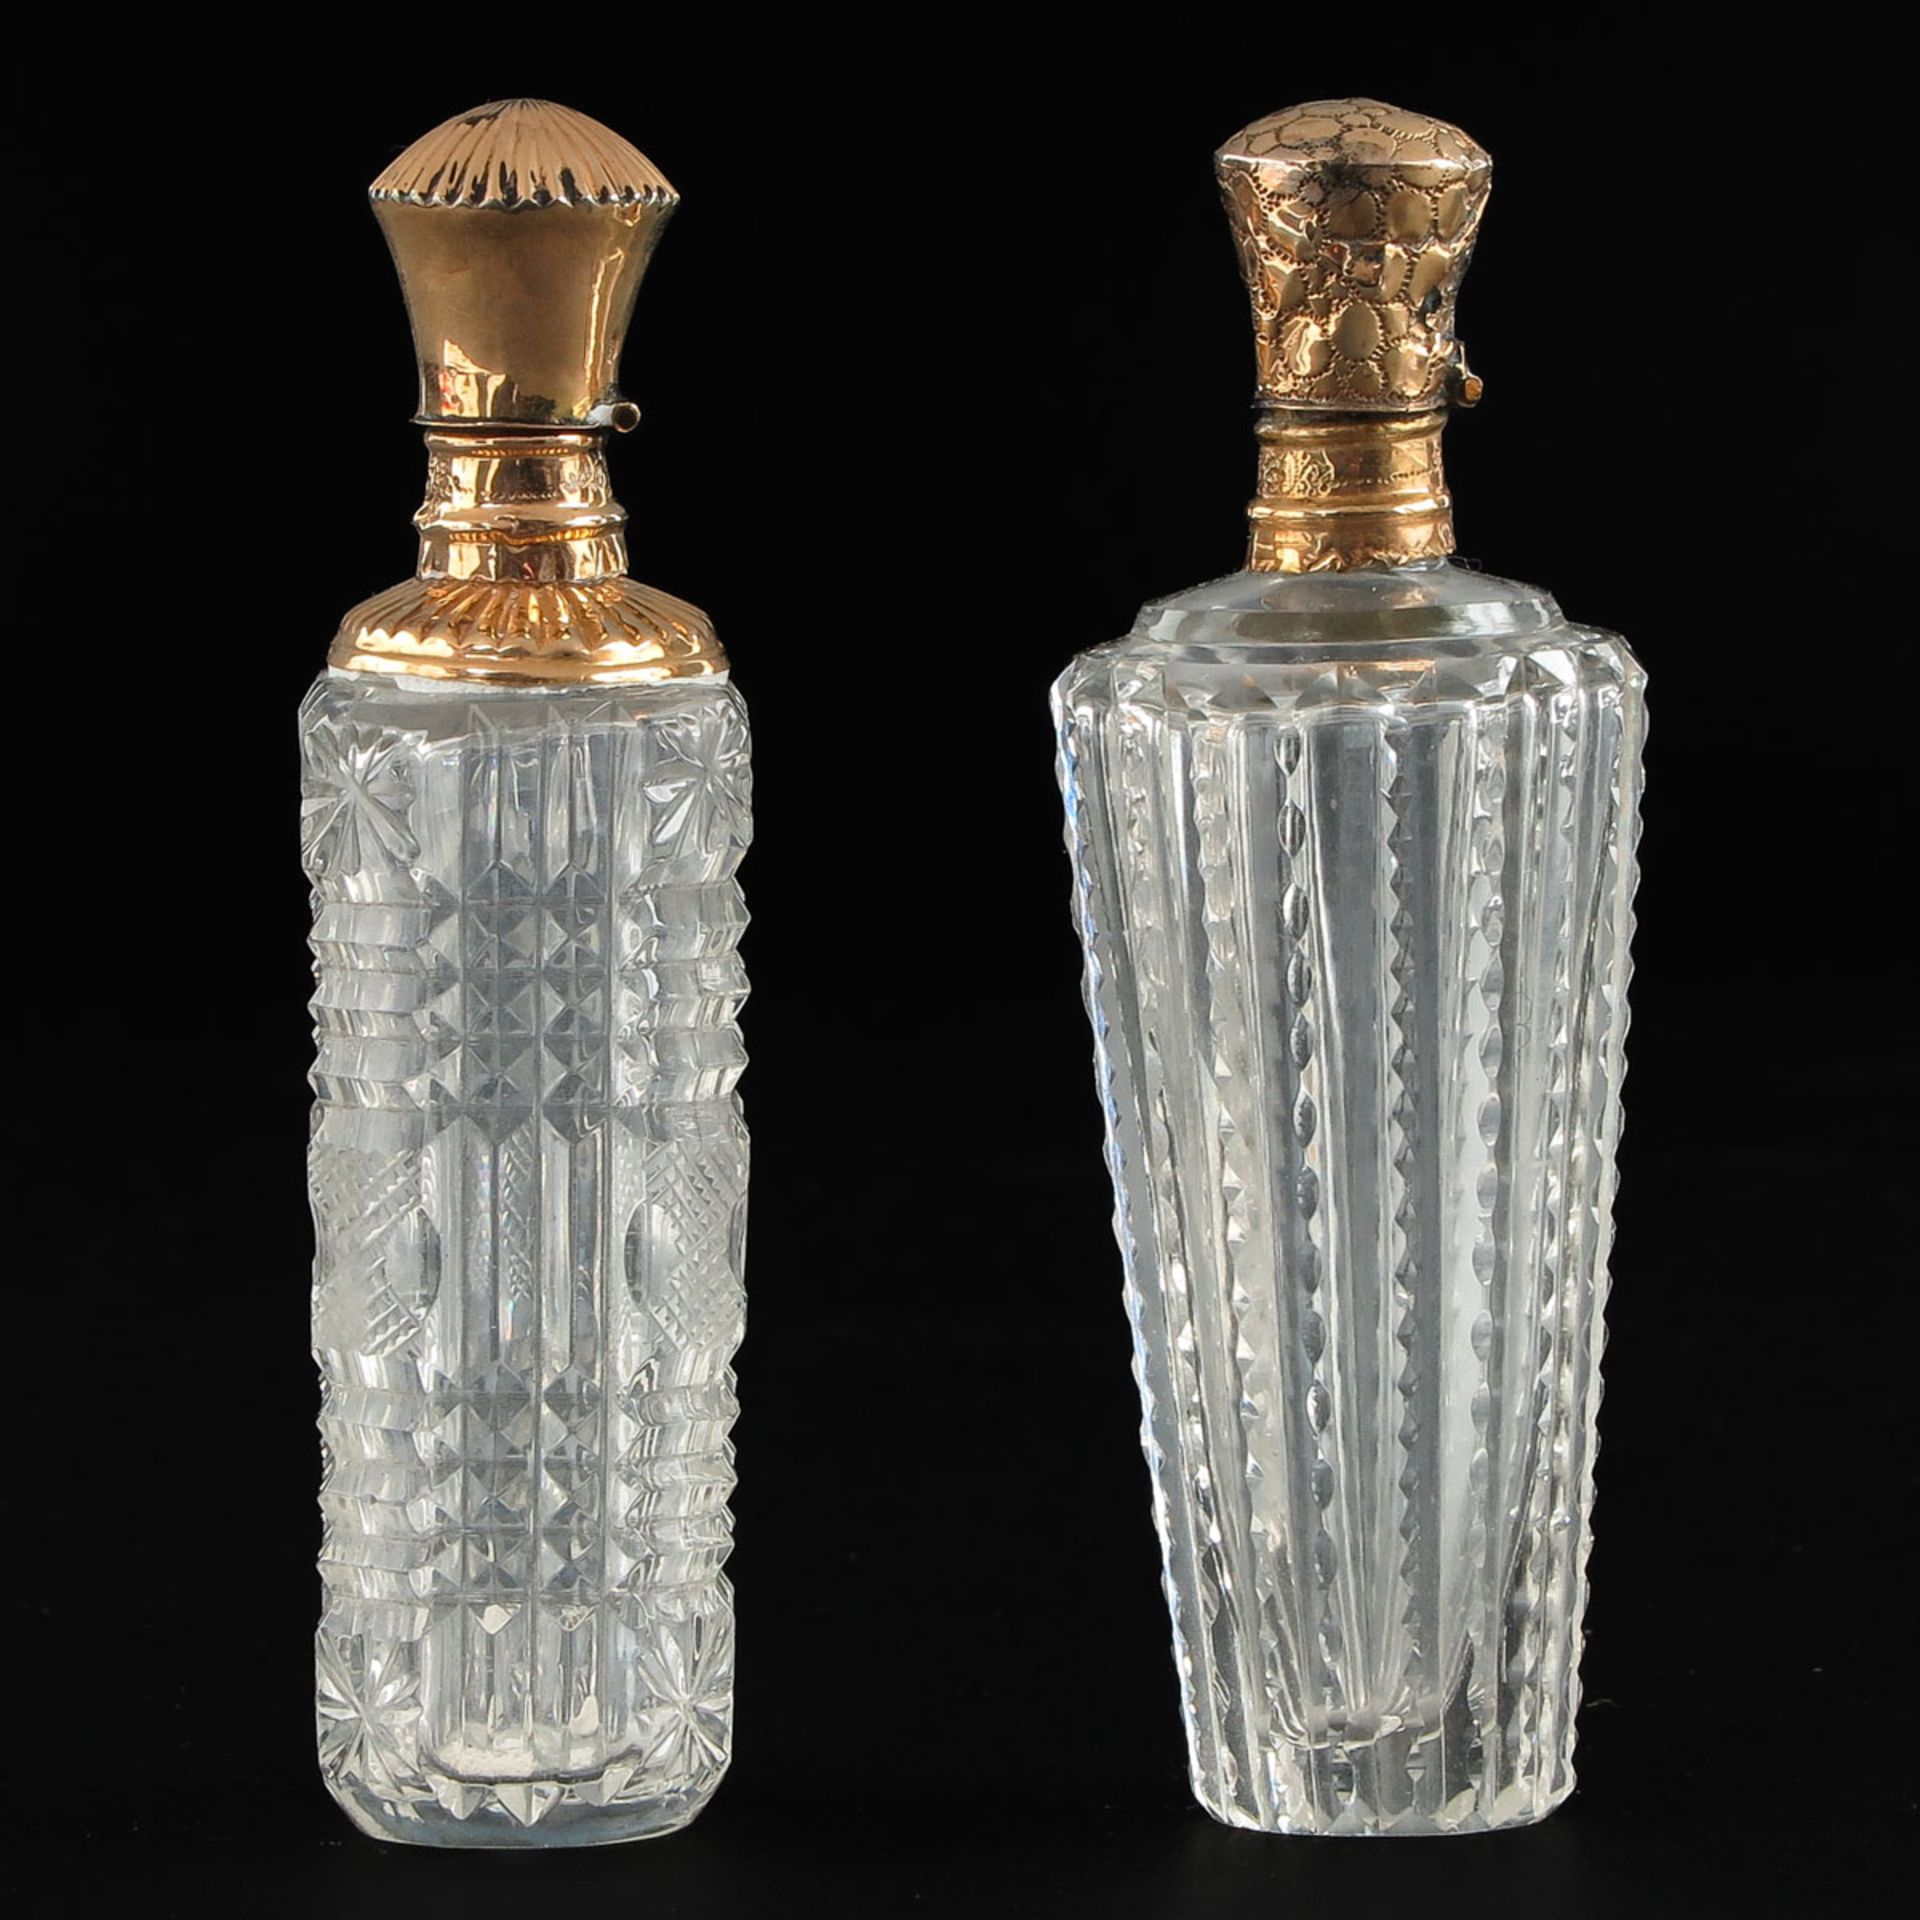 A Lot of 2 Perfume Bottles - Image 2 of 9